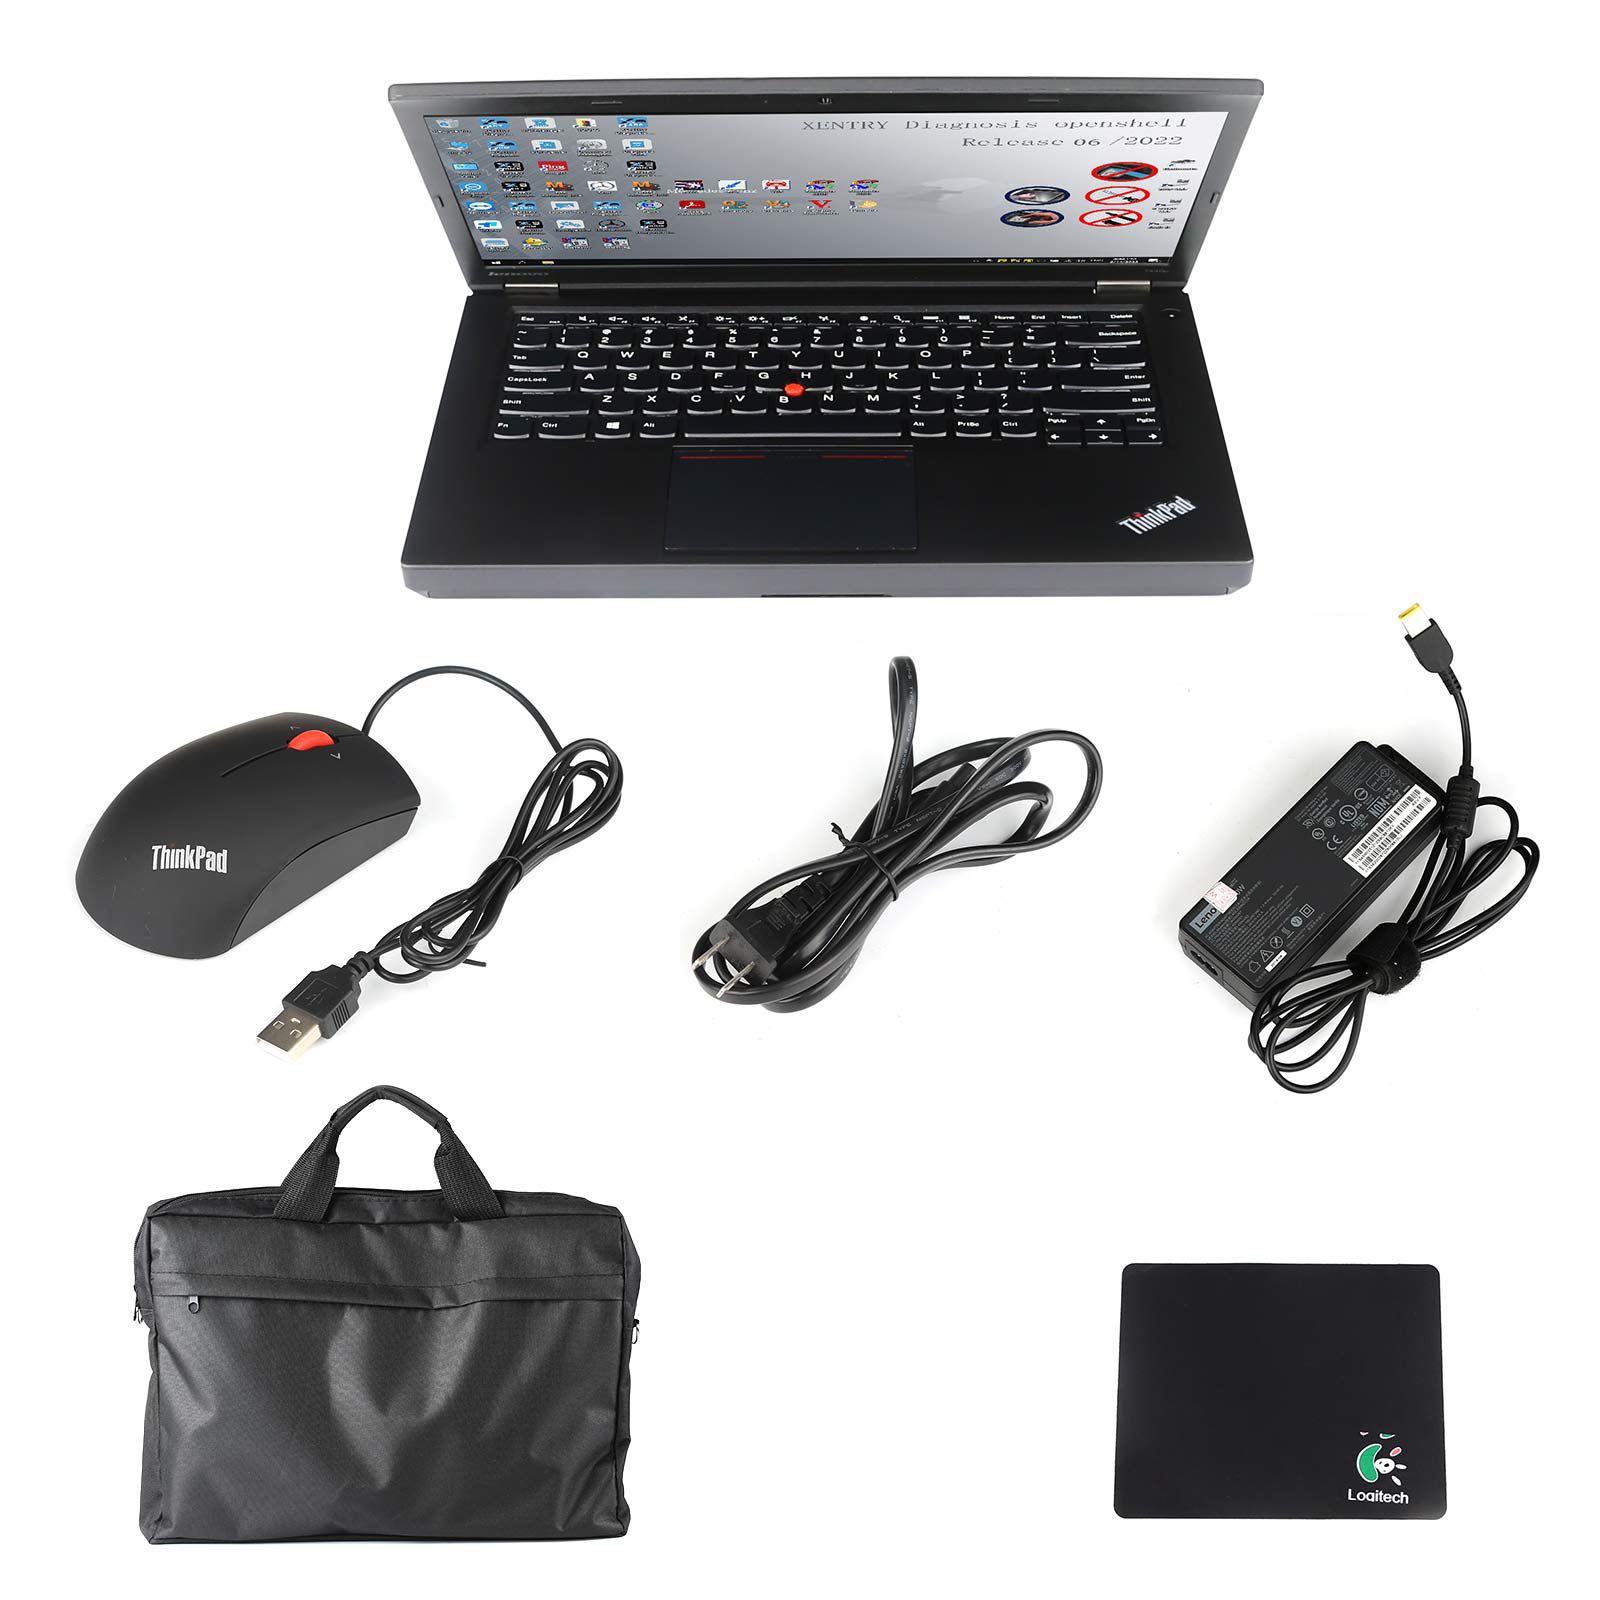 V2022.12 MB SD C4 Plus Support Doip with SSD Plus Lenovo T440P Laptop I7 8GB Laptop Software Installed Ready to Use Free Shipping by DHL